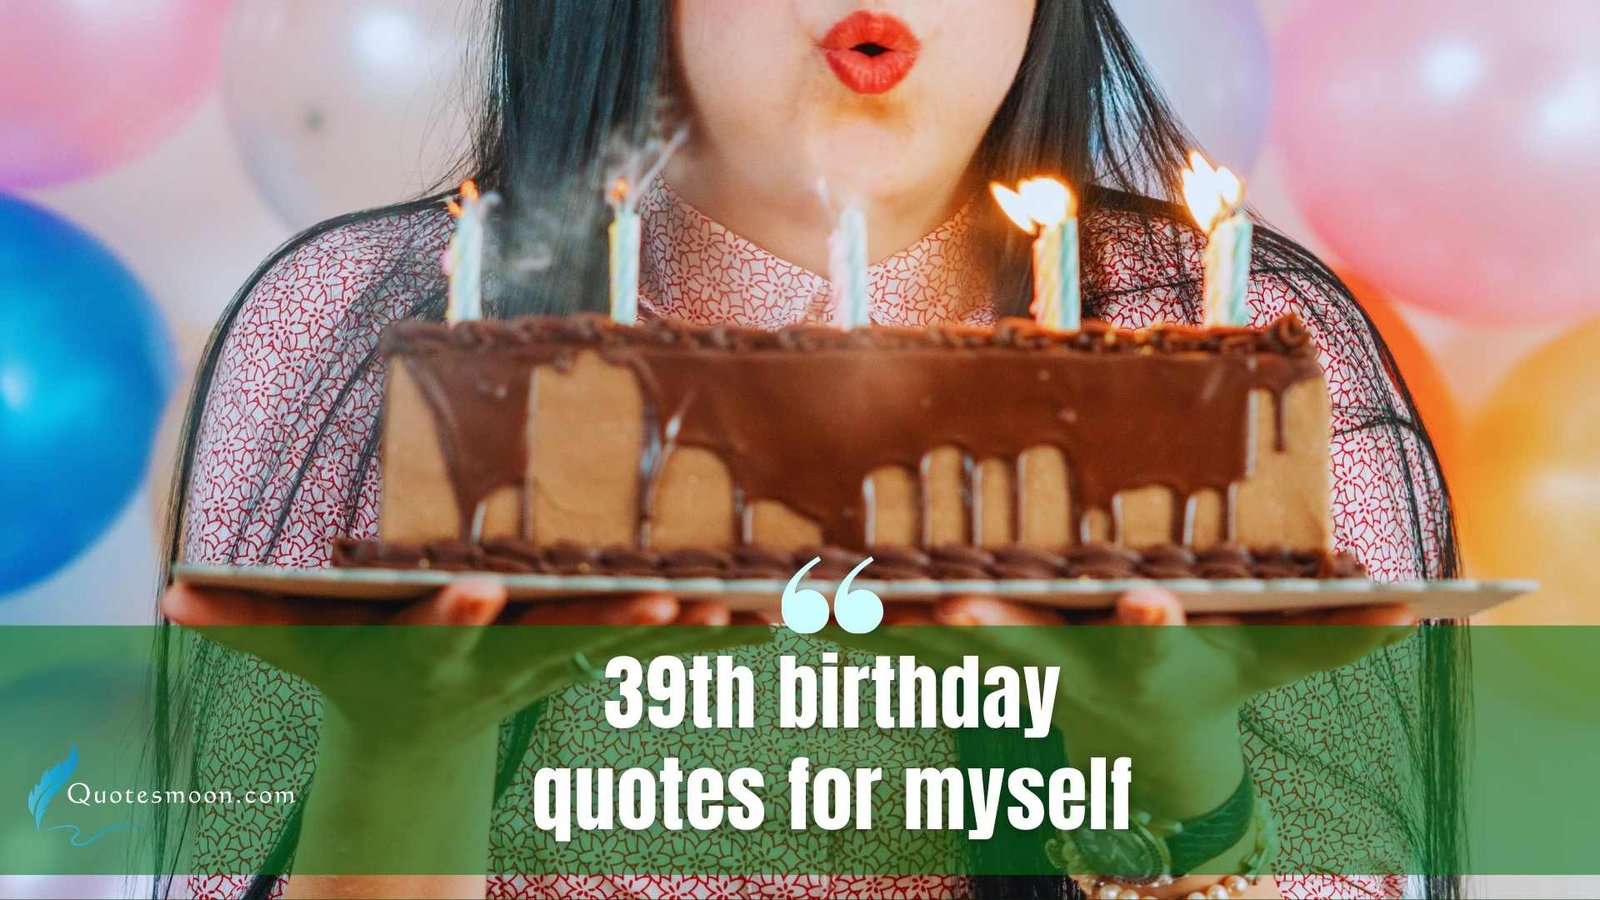 39th birthday quotes for myself images